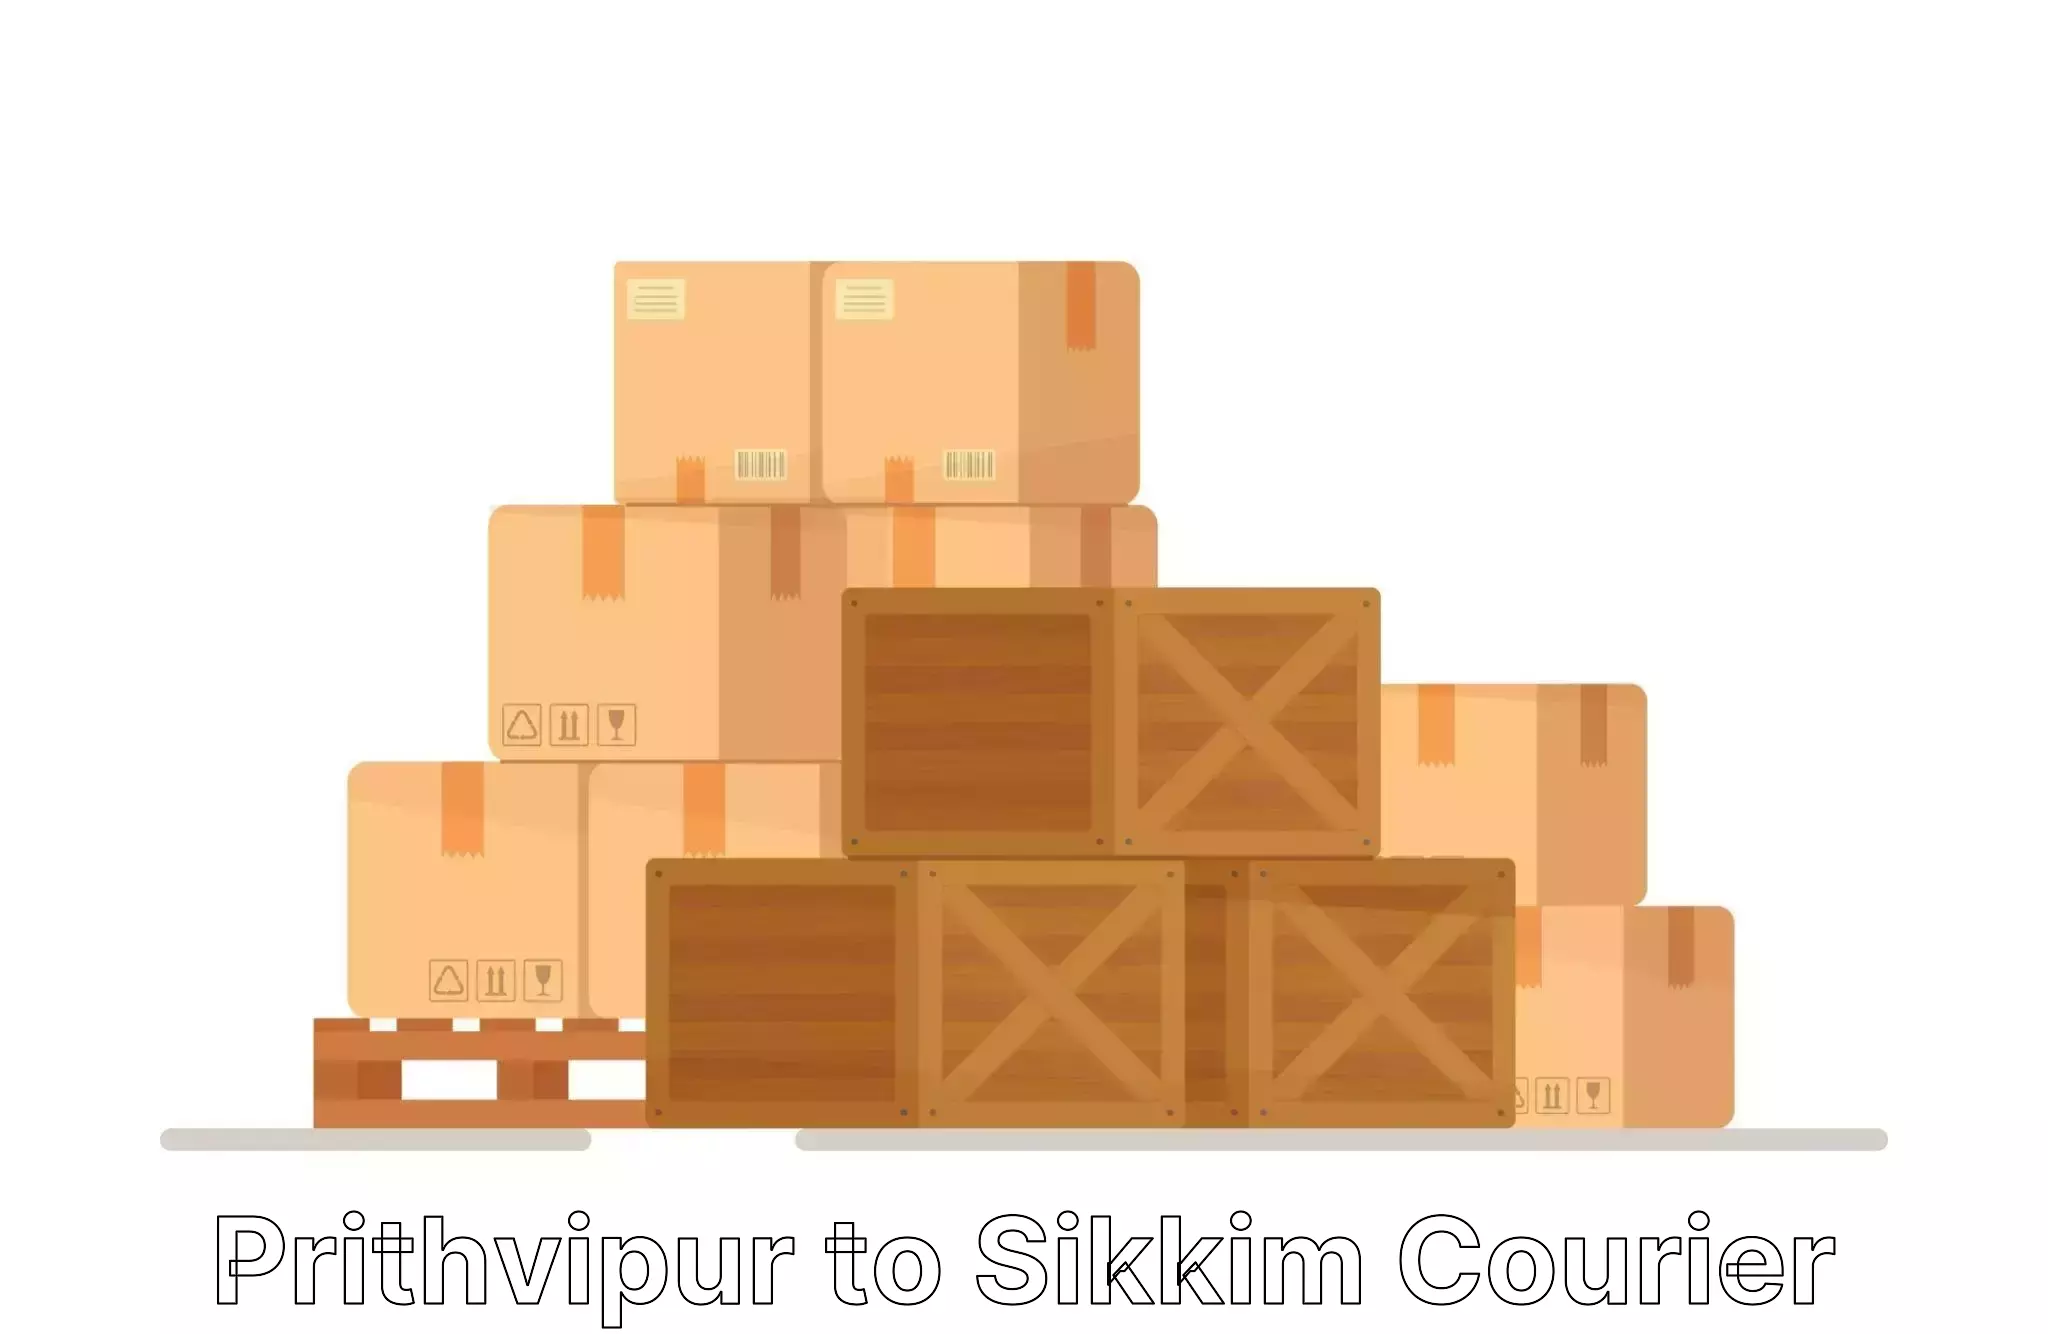 Furniture transport company Prithvipur to Sikkim